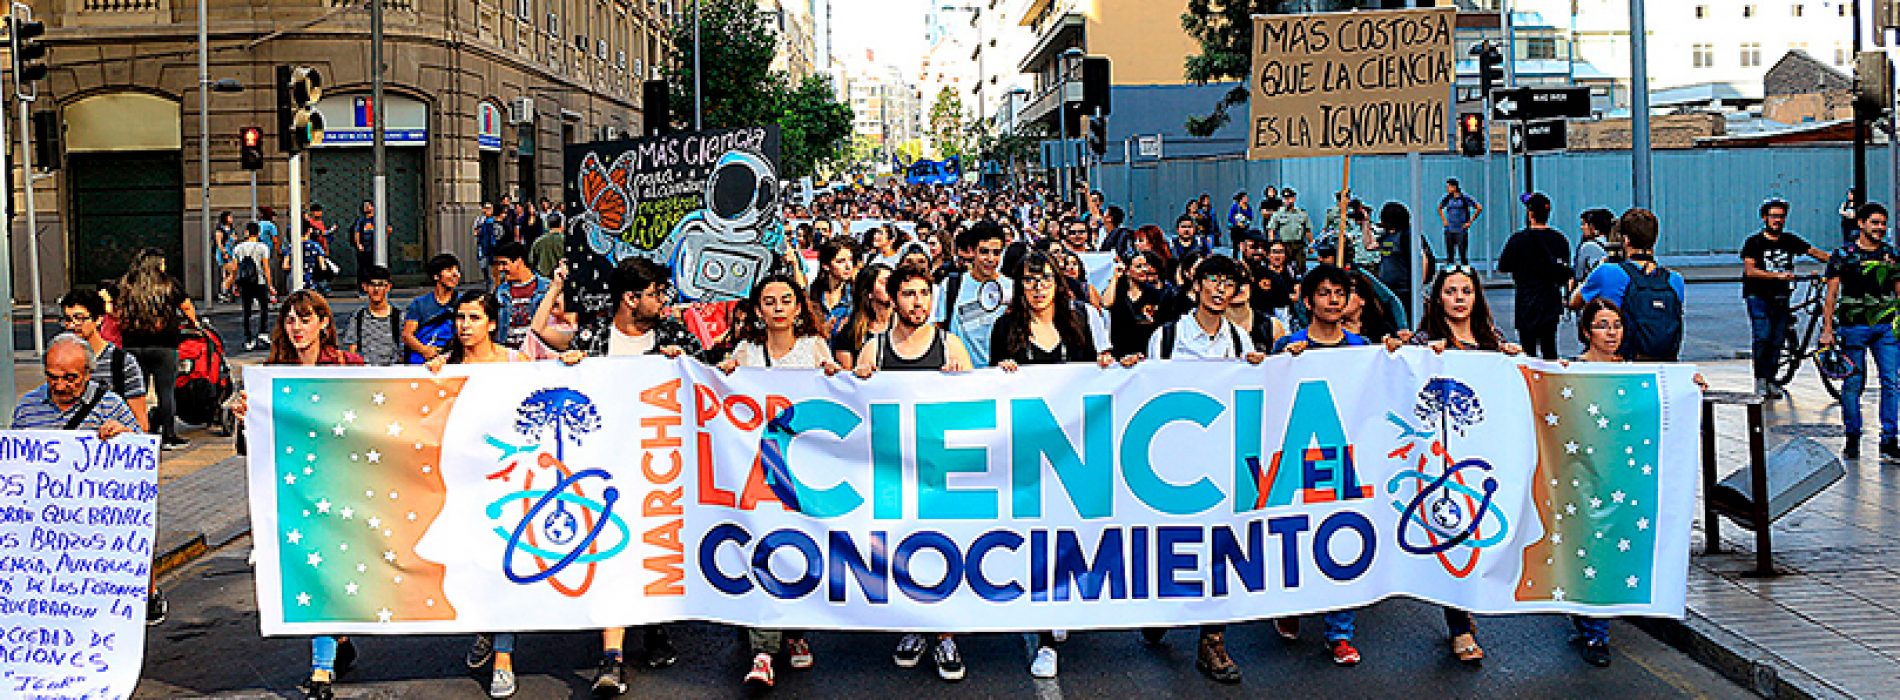 March for science and knowledge